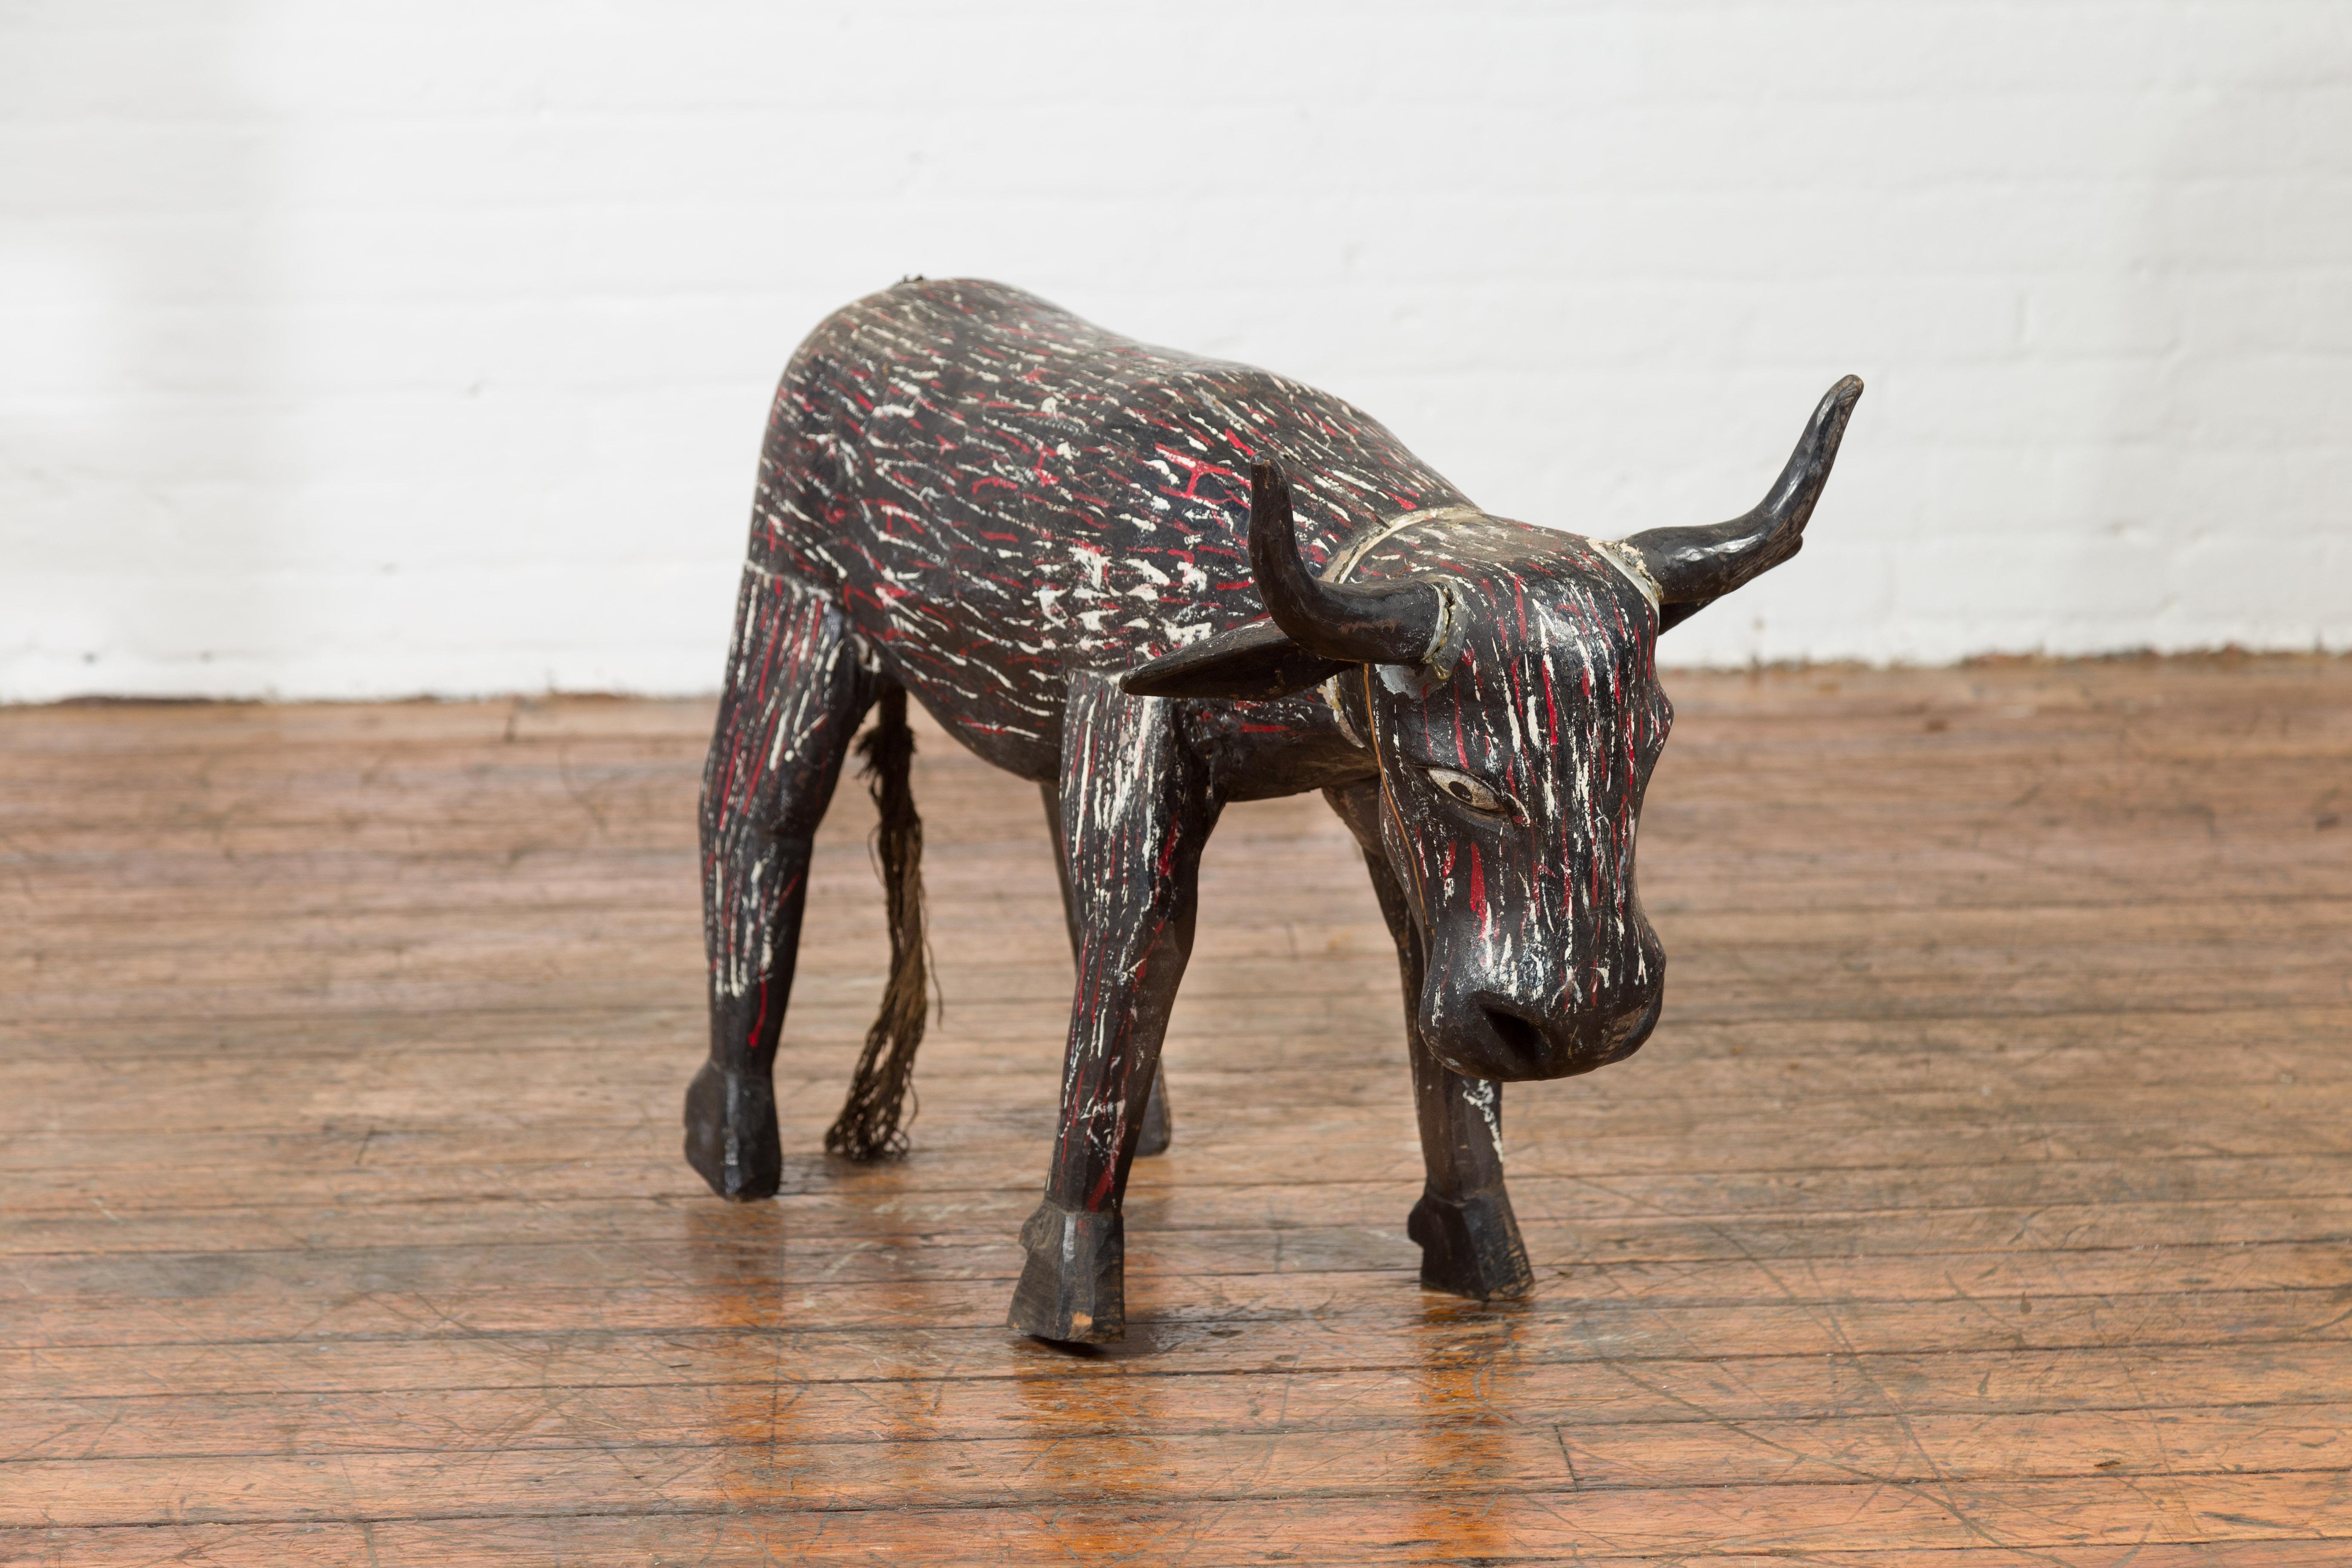 An Indian hand painted and carved wooden cow from the early 20th century, with nicely weathered patina. Created in India during the early years of the 20th century, this wooden cow sculpture charms us with its archaic features and aged appearance.